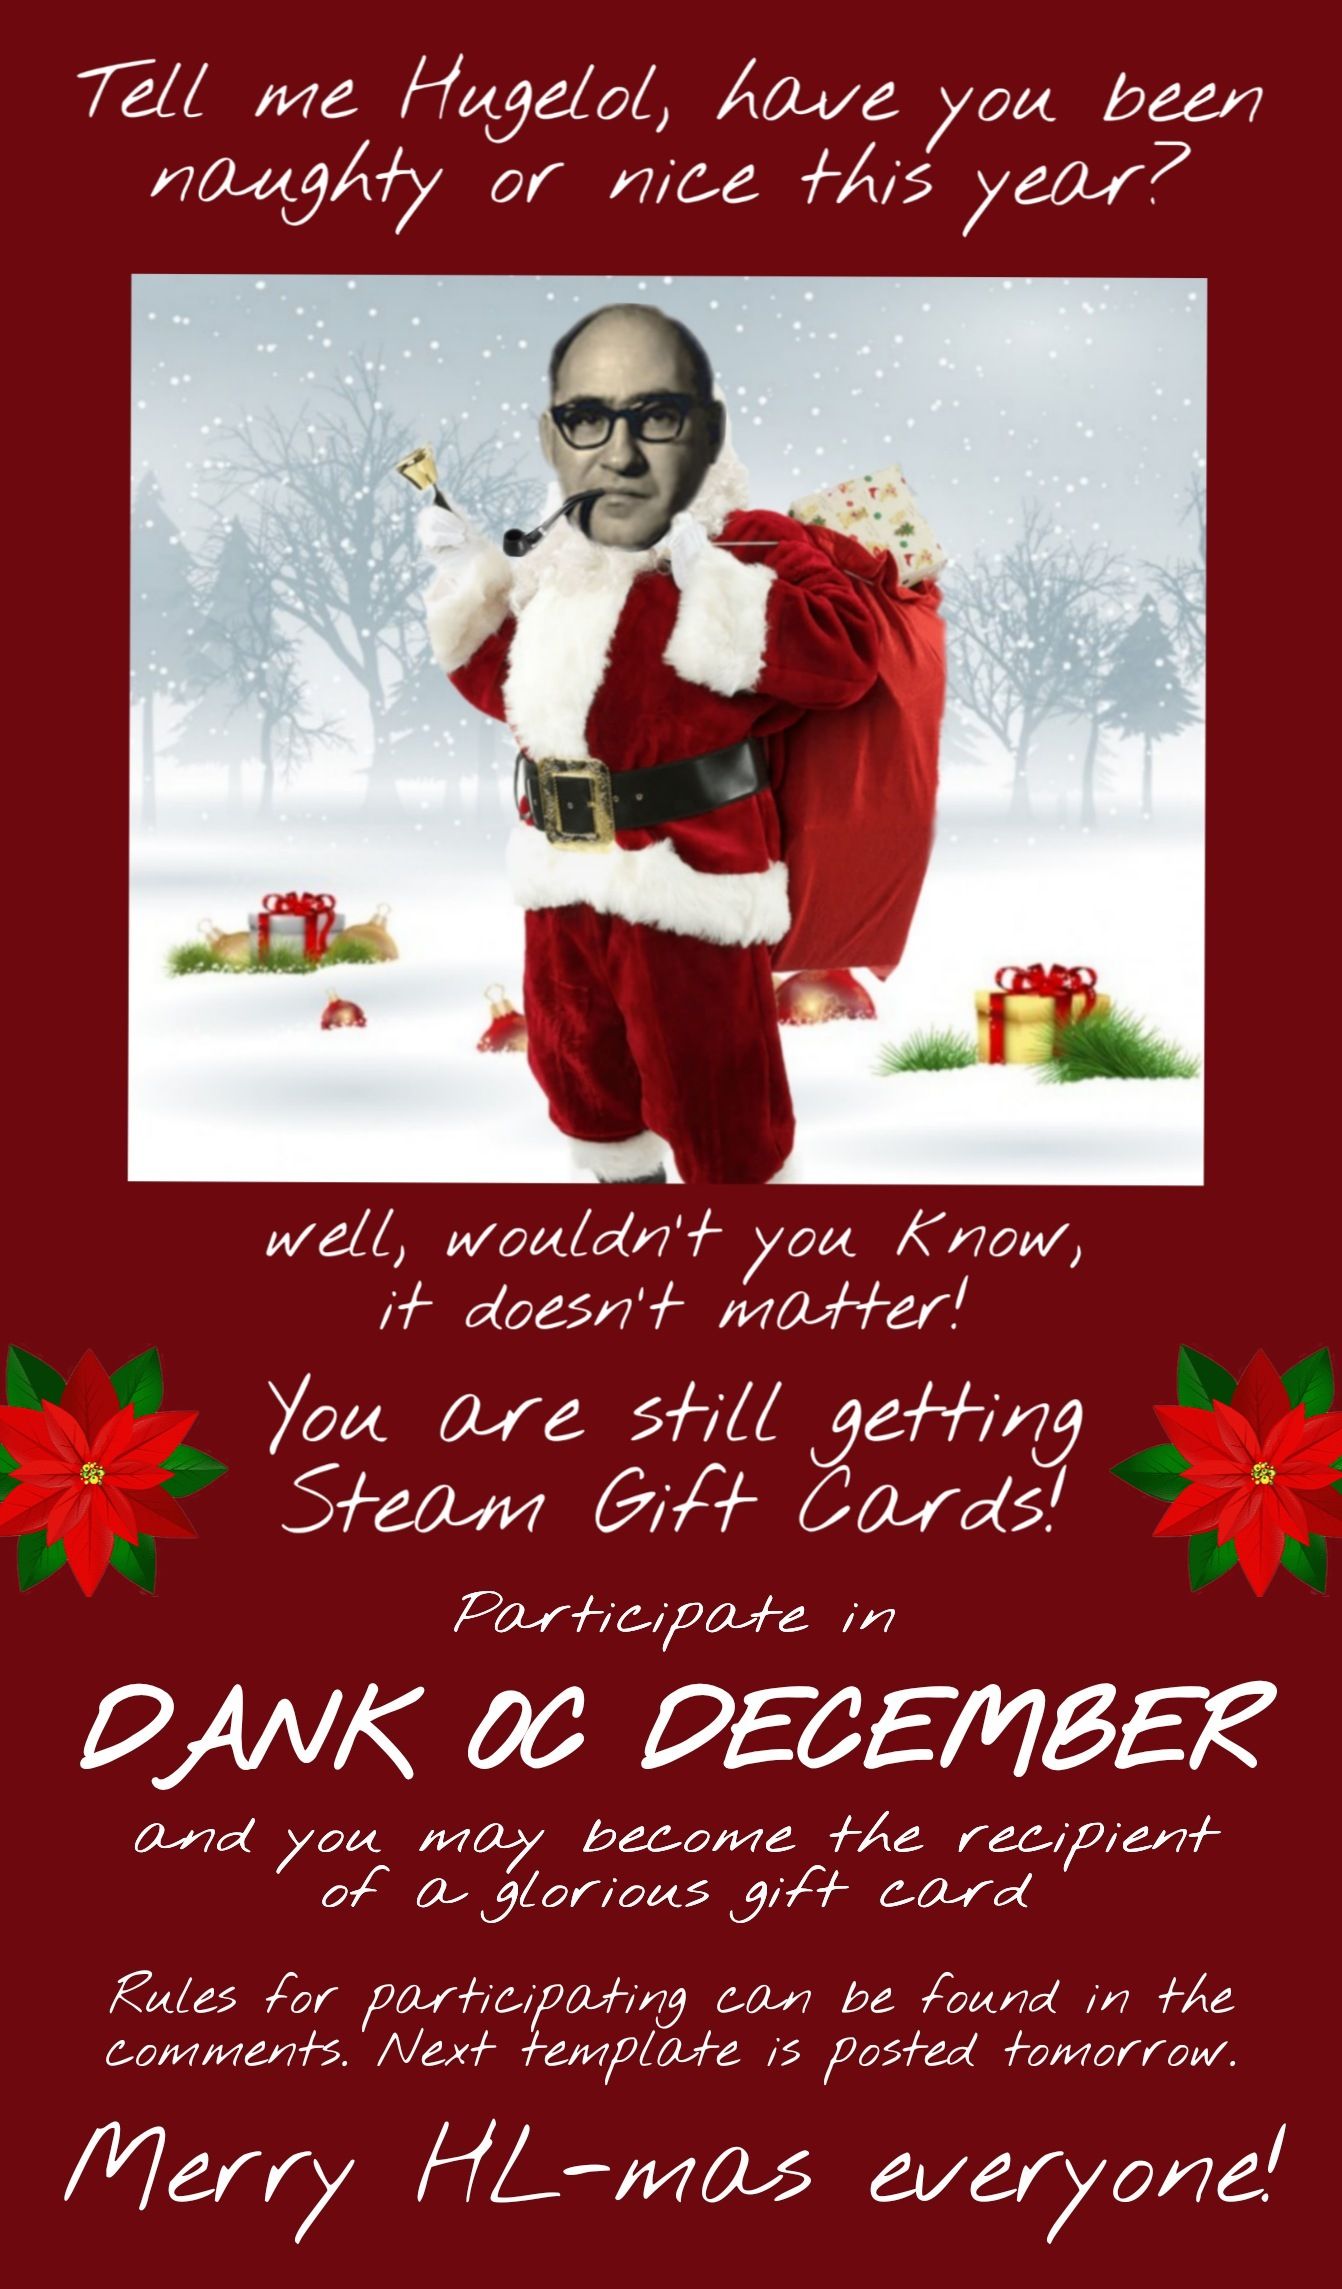 Announcing: Dank OC December! Participate and DrArchiSanta may come bearing gifts